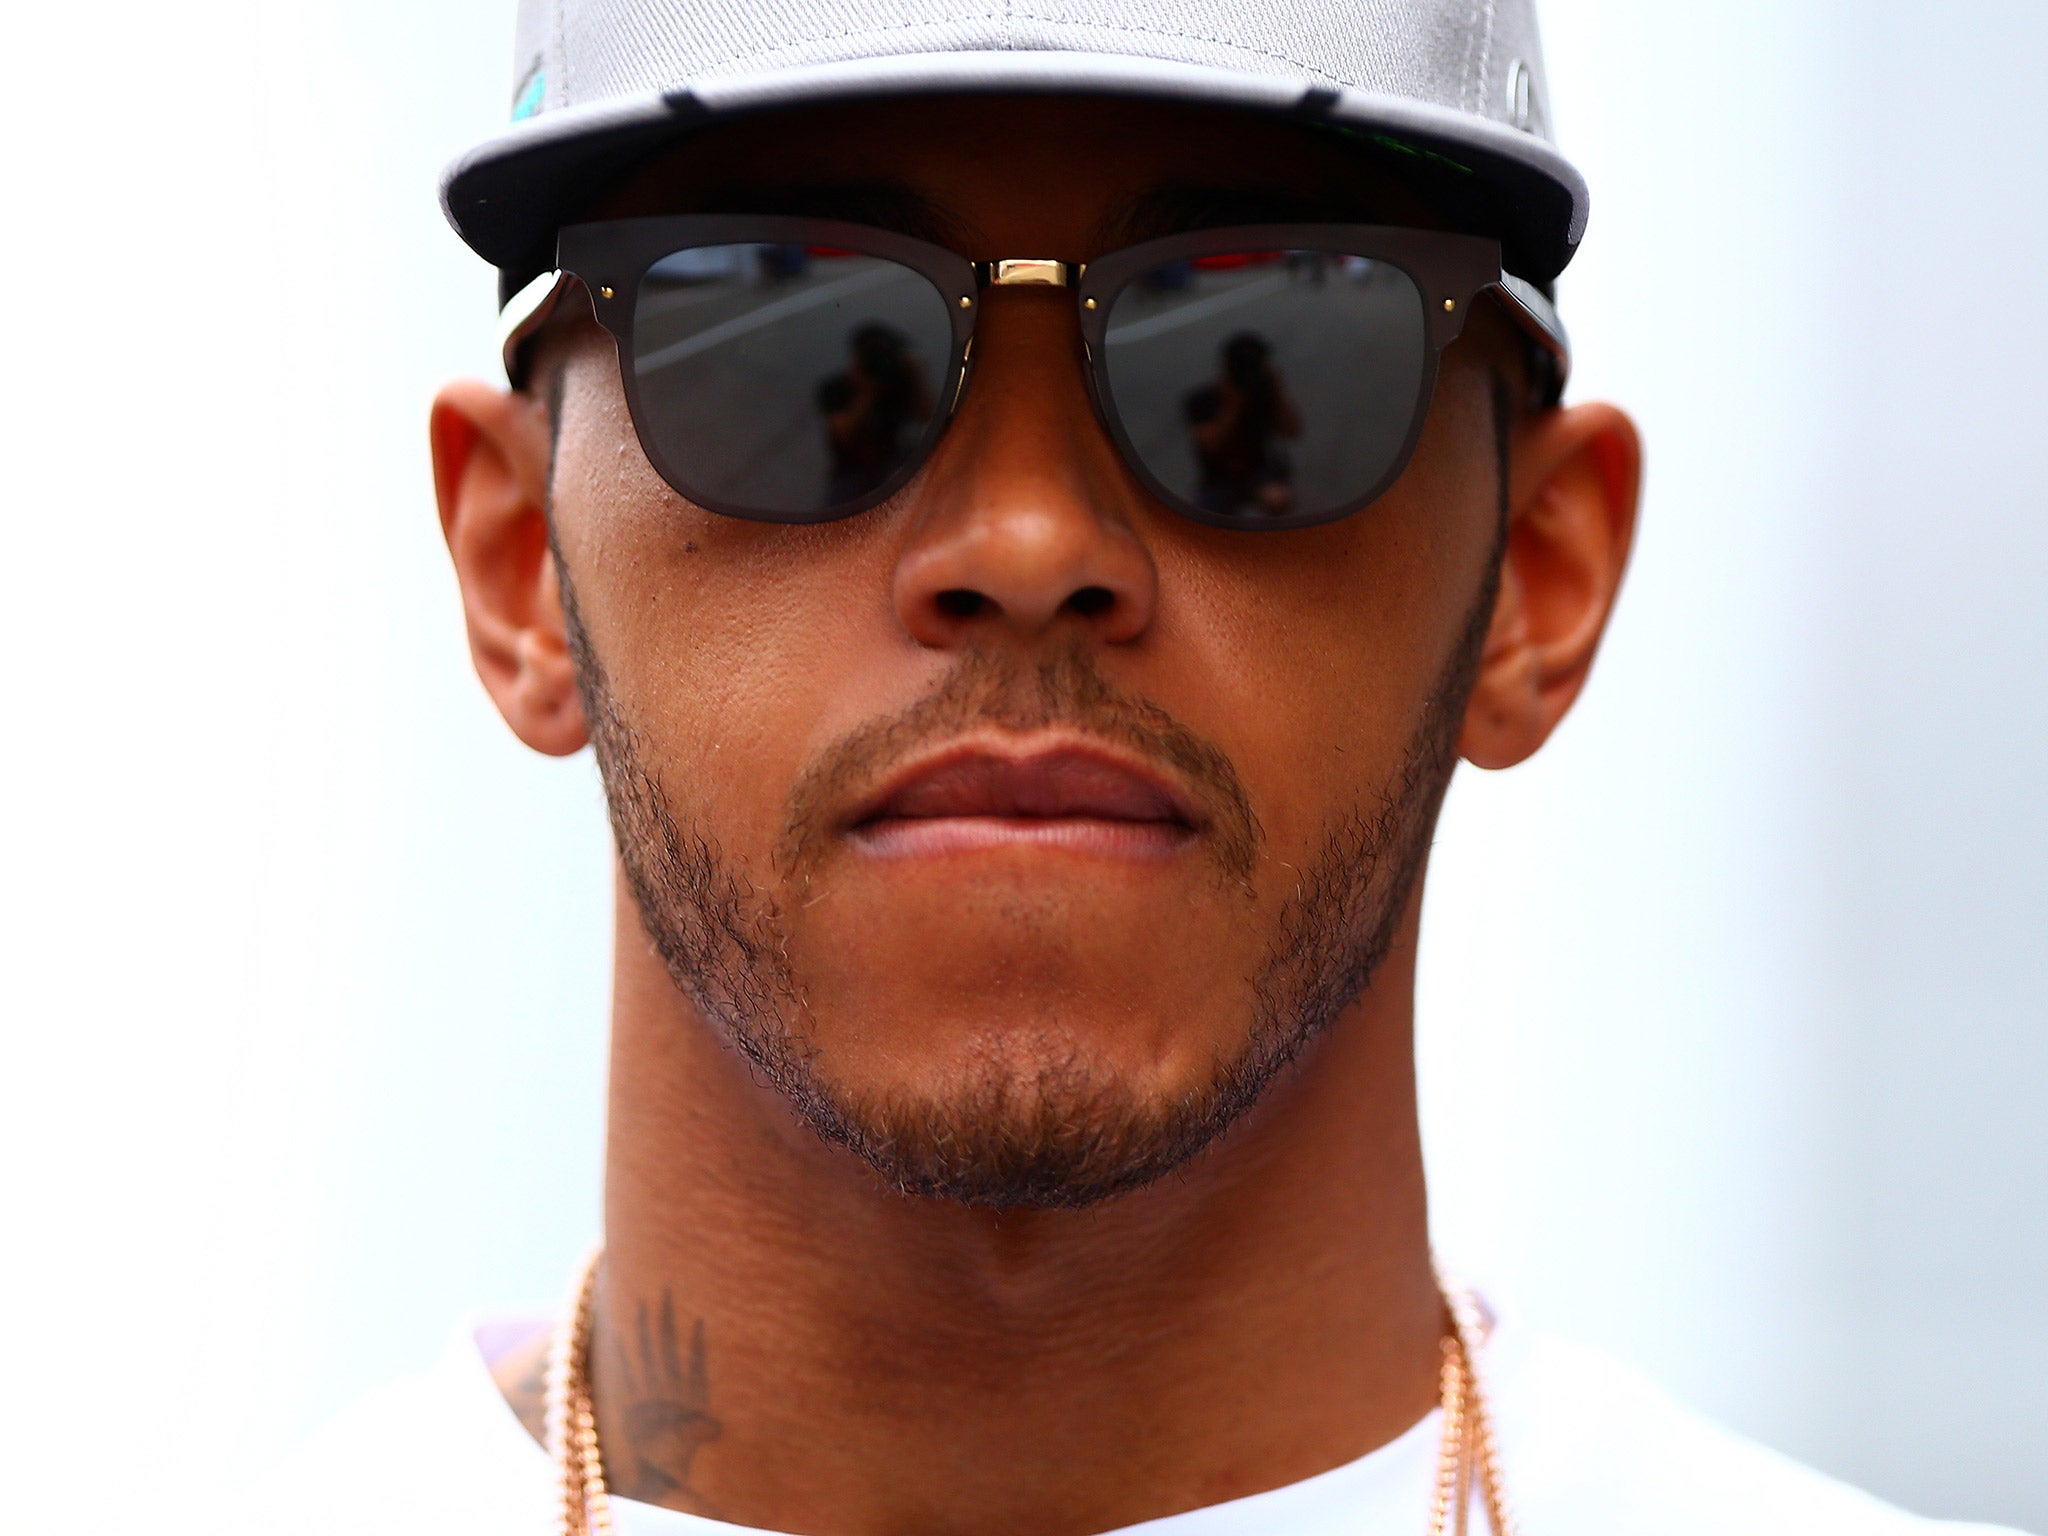 Lewis Hamilton has come under fire after posing on Snapchat with tigers